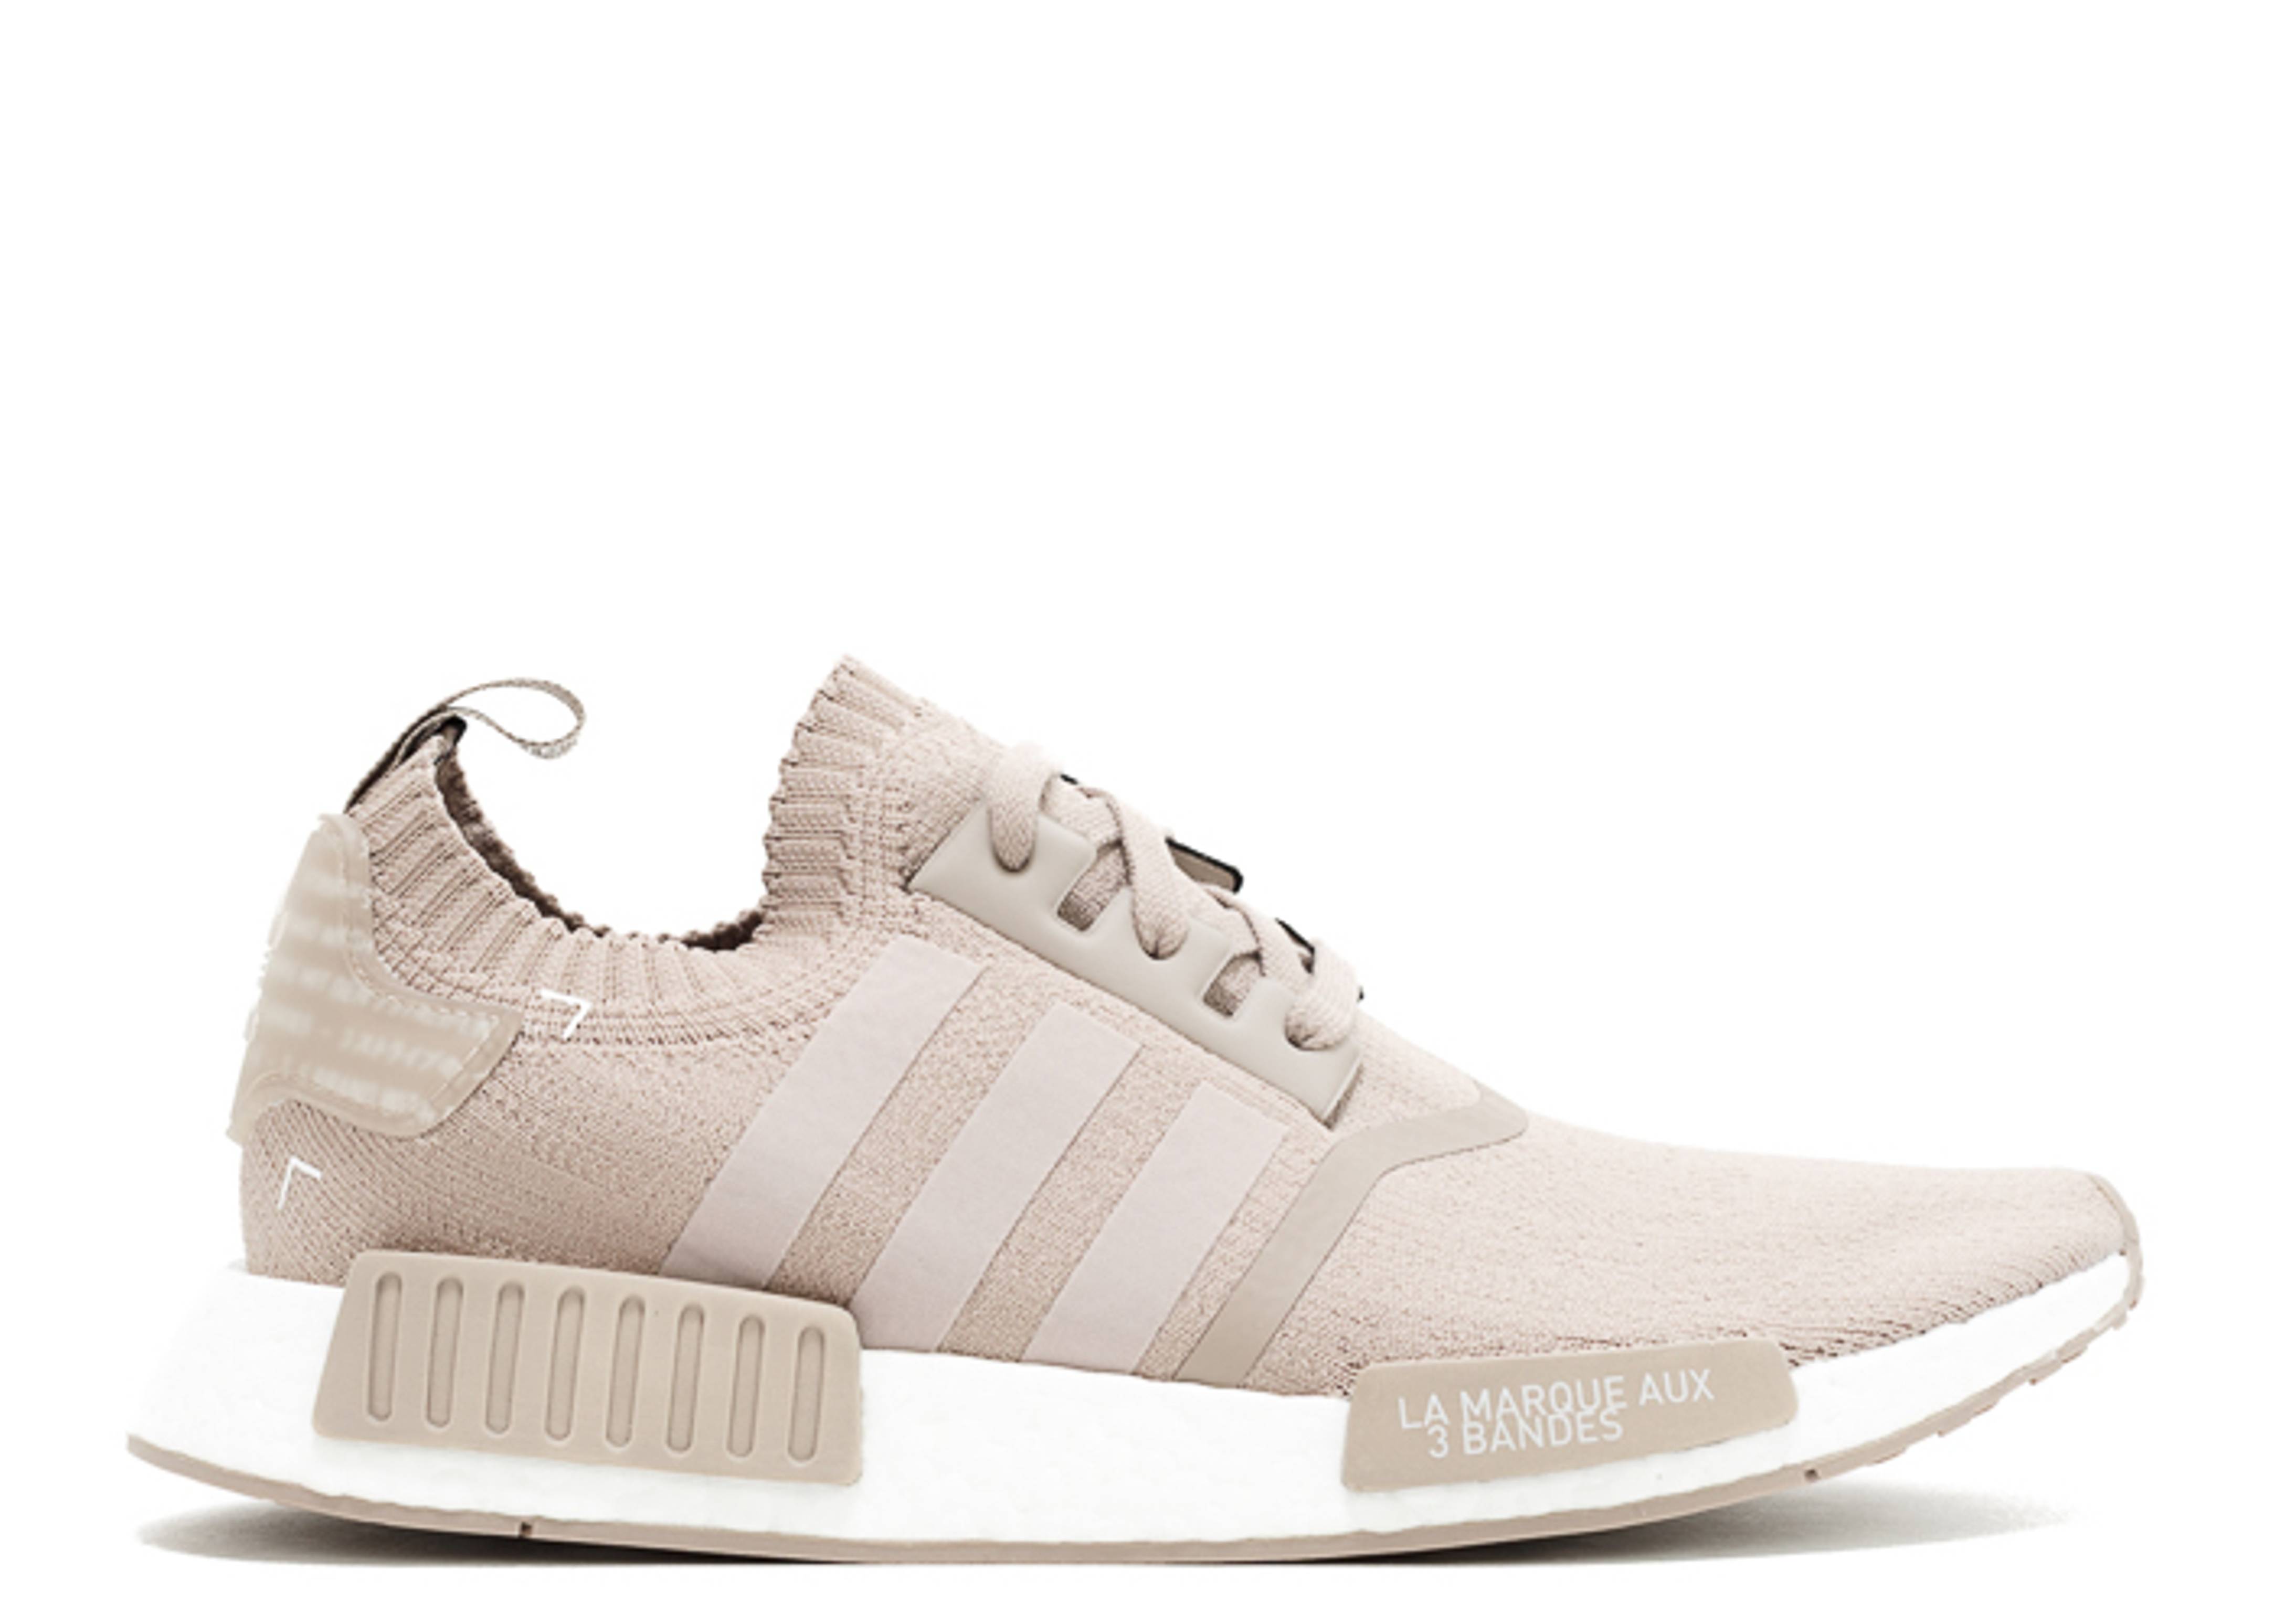 NMD_R1 PK 'French Beige'